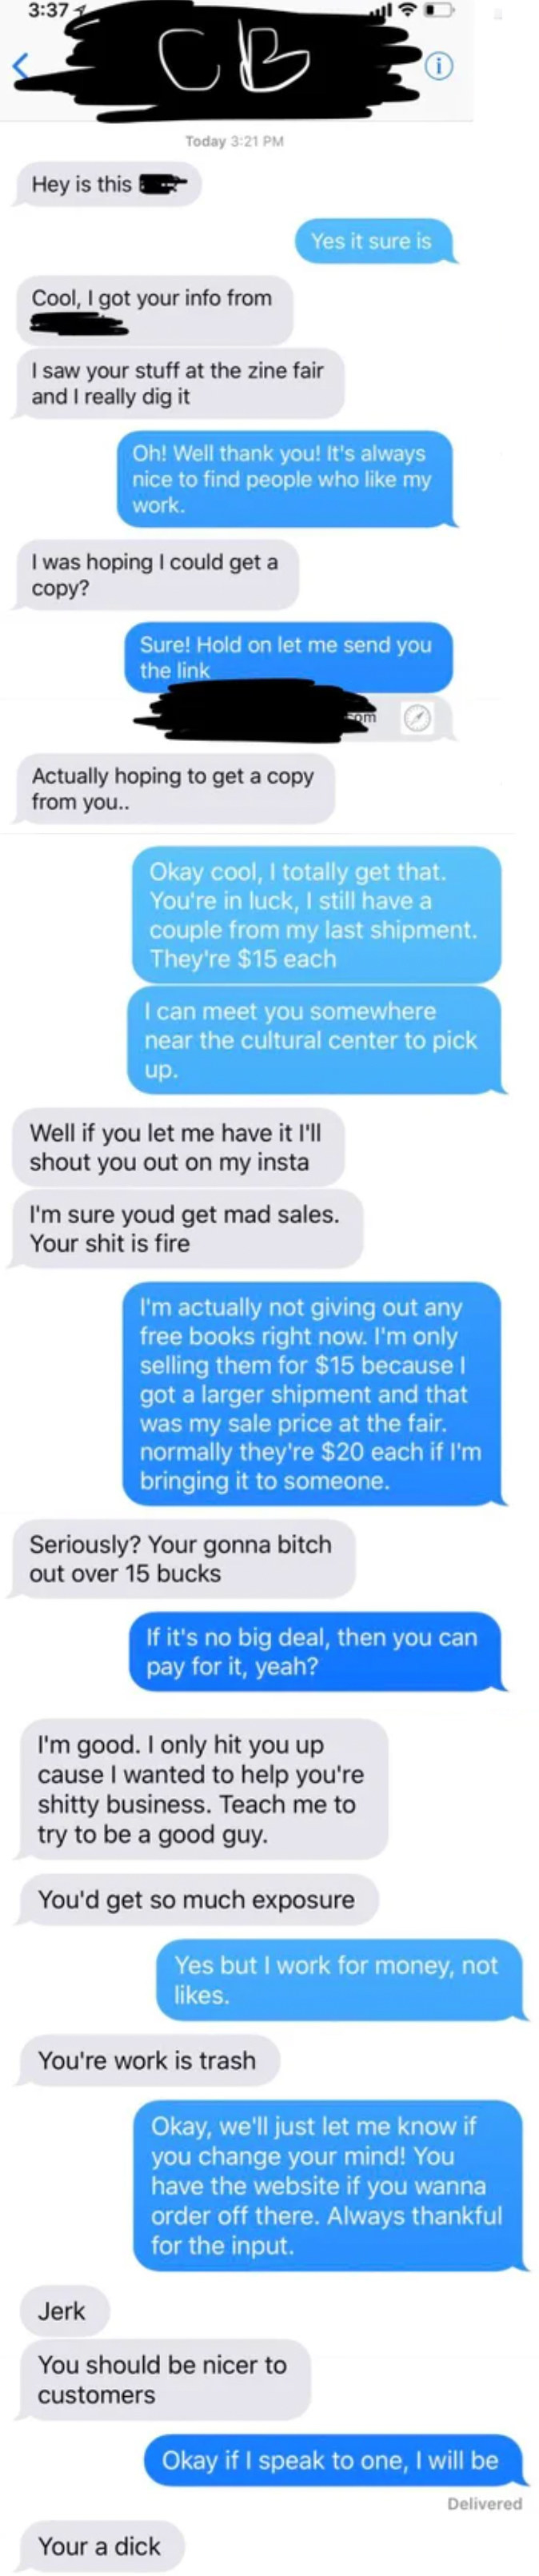 Someone asks for a free book, then gets rude when they&#x27;re denied